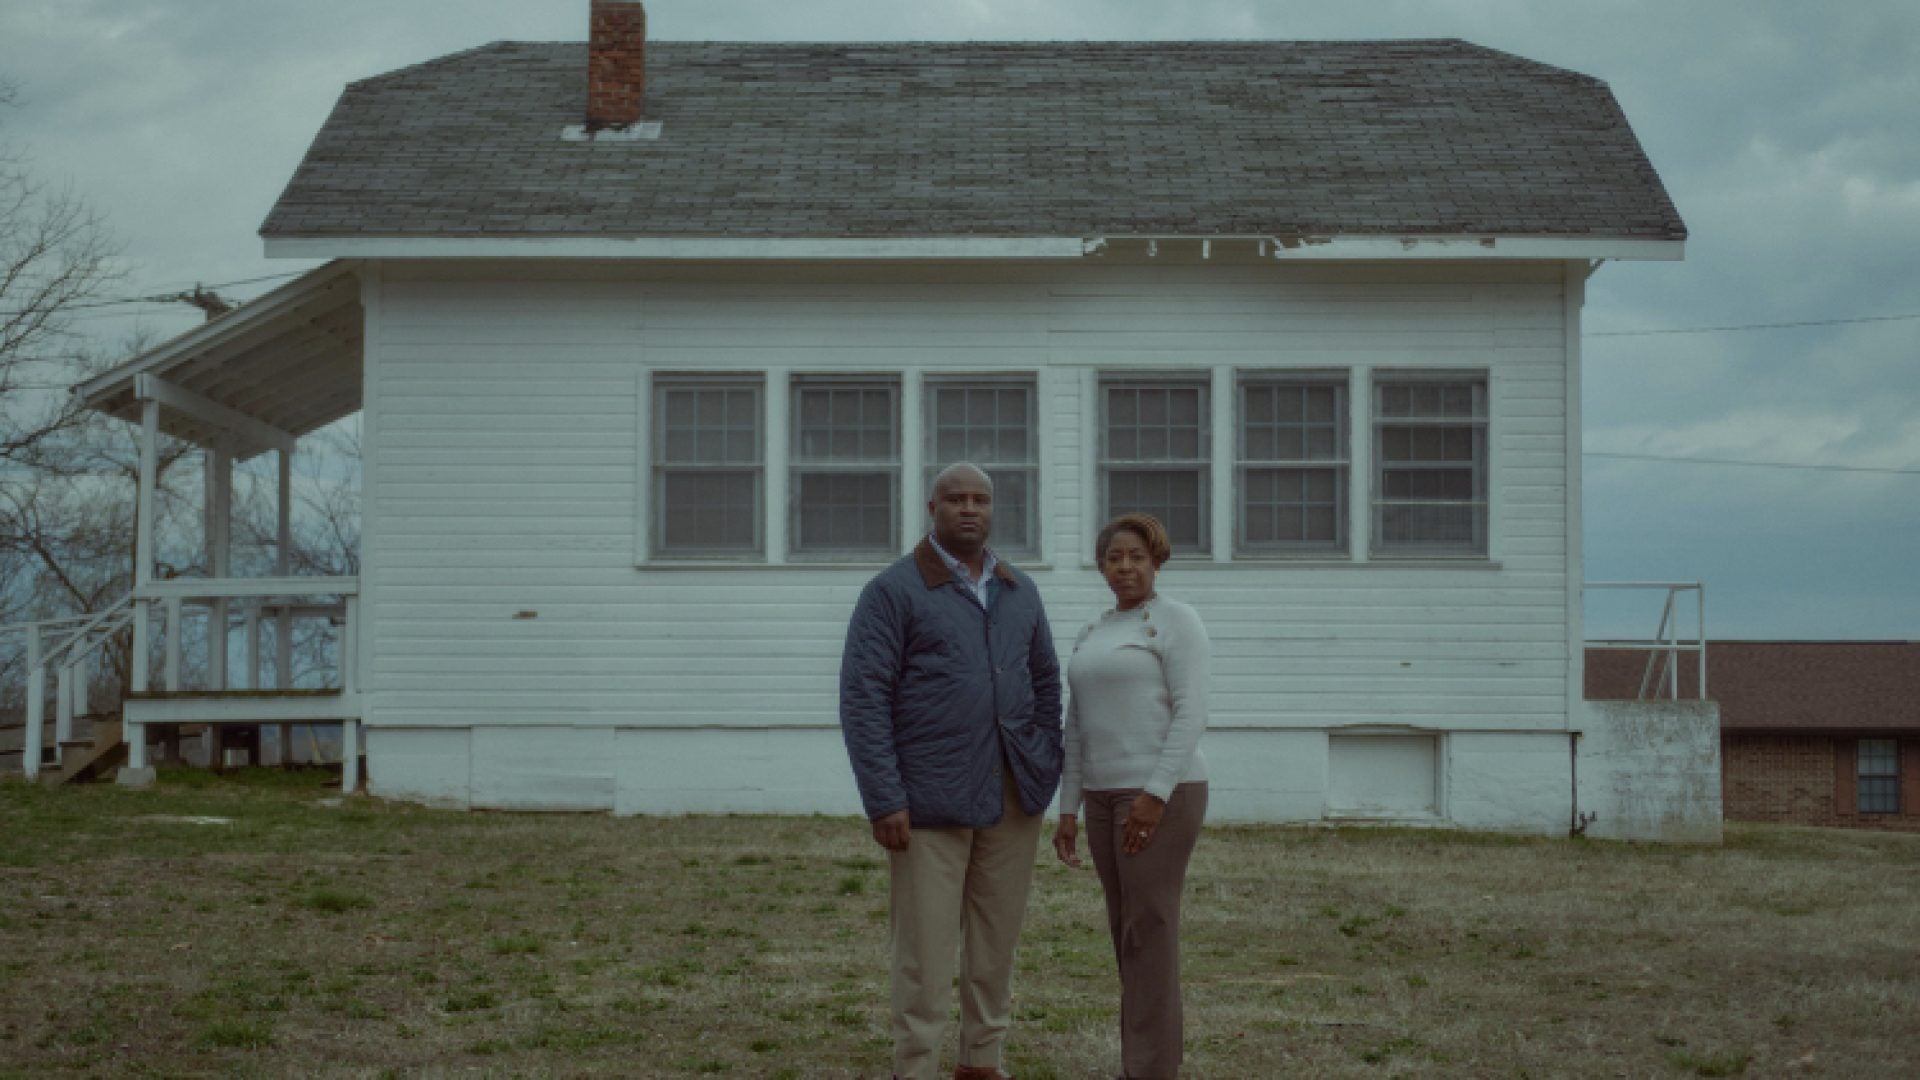 An All-Black School Shut Down In Missouri. This Family Bought It To Restore Its Legacy